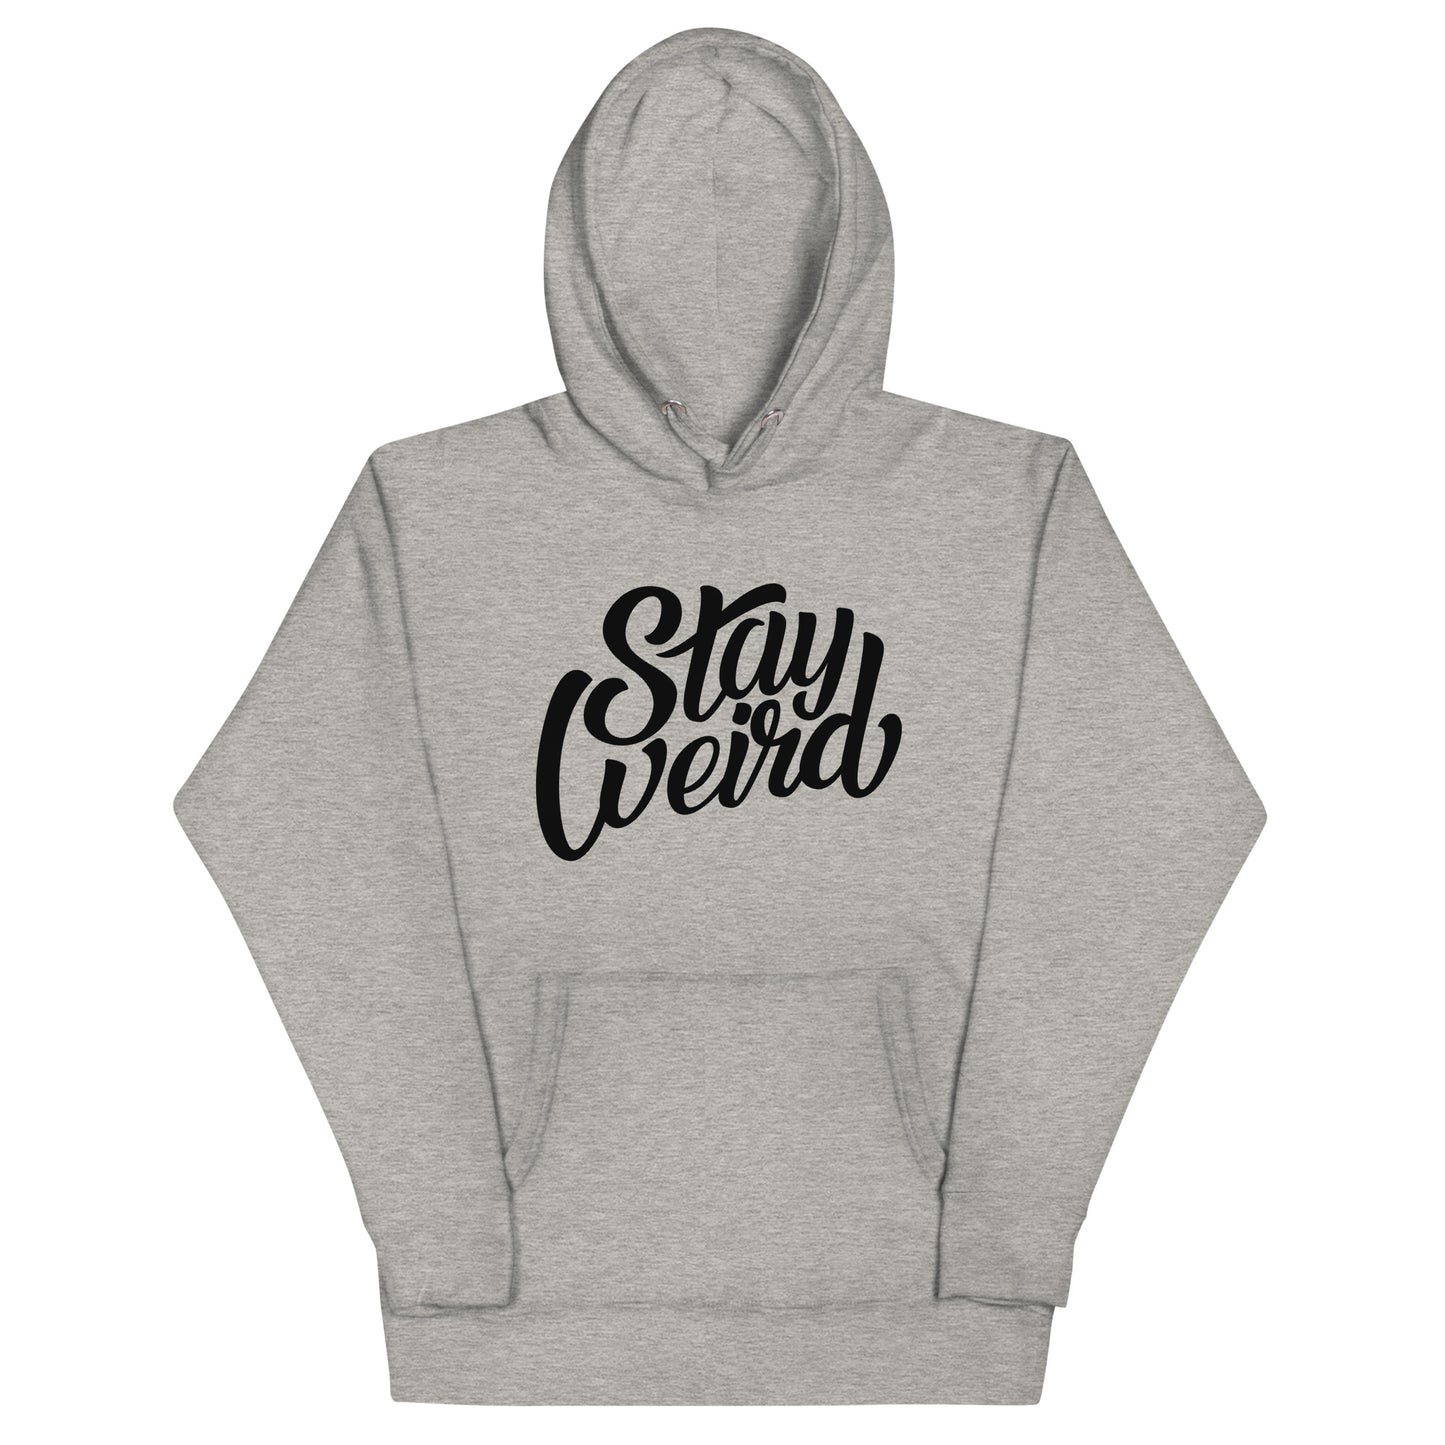 hoodie Stay Weird gray by B.Different Clothing independent streetwear brand inspired by street art graffiti